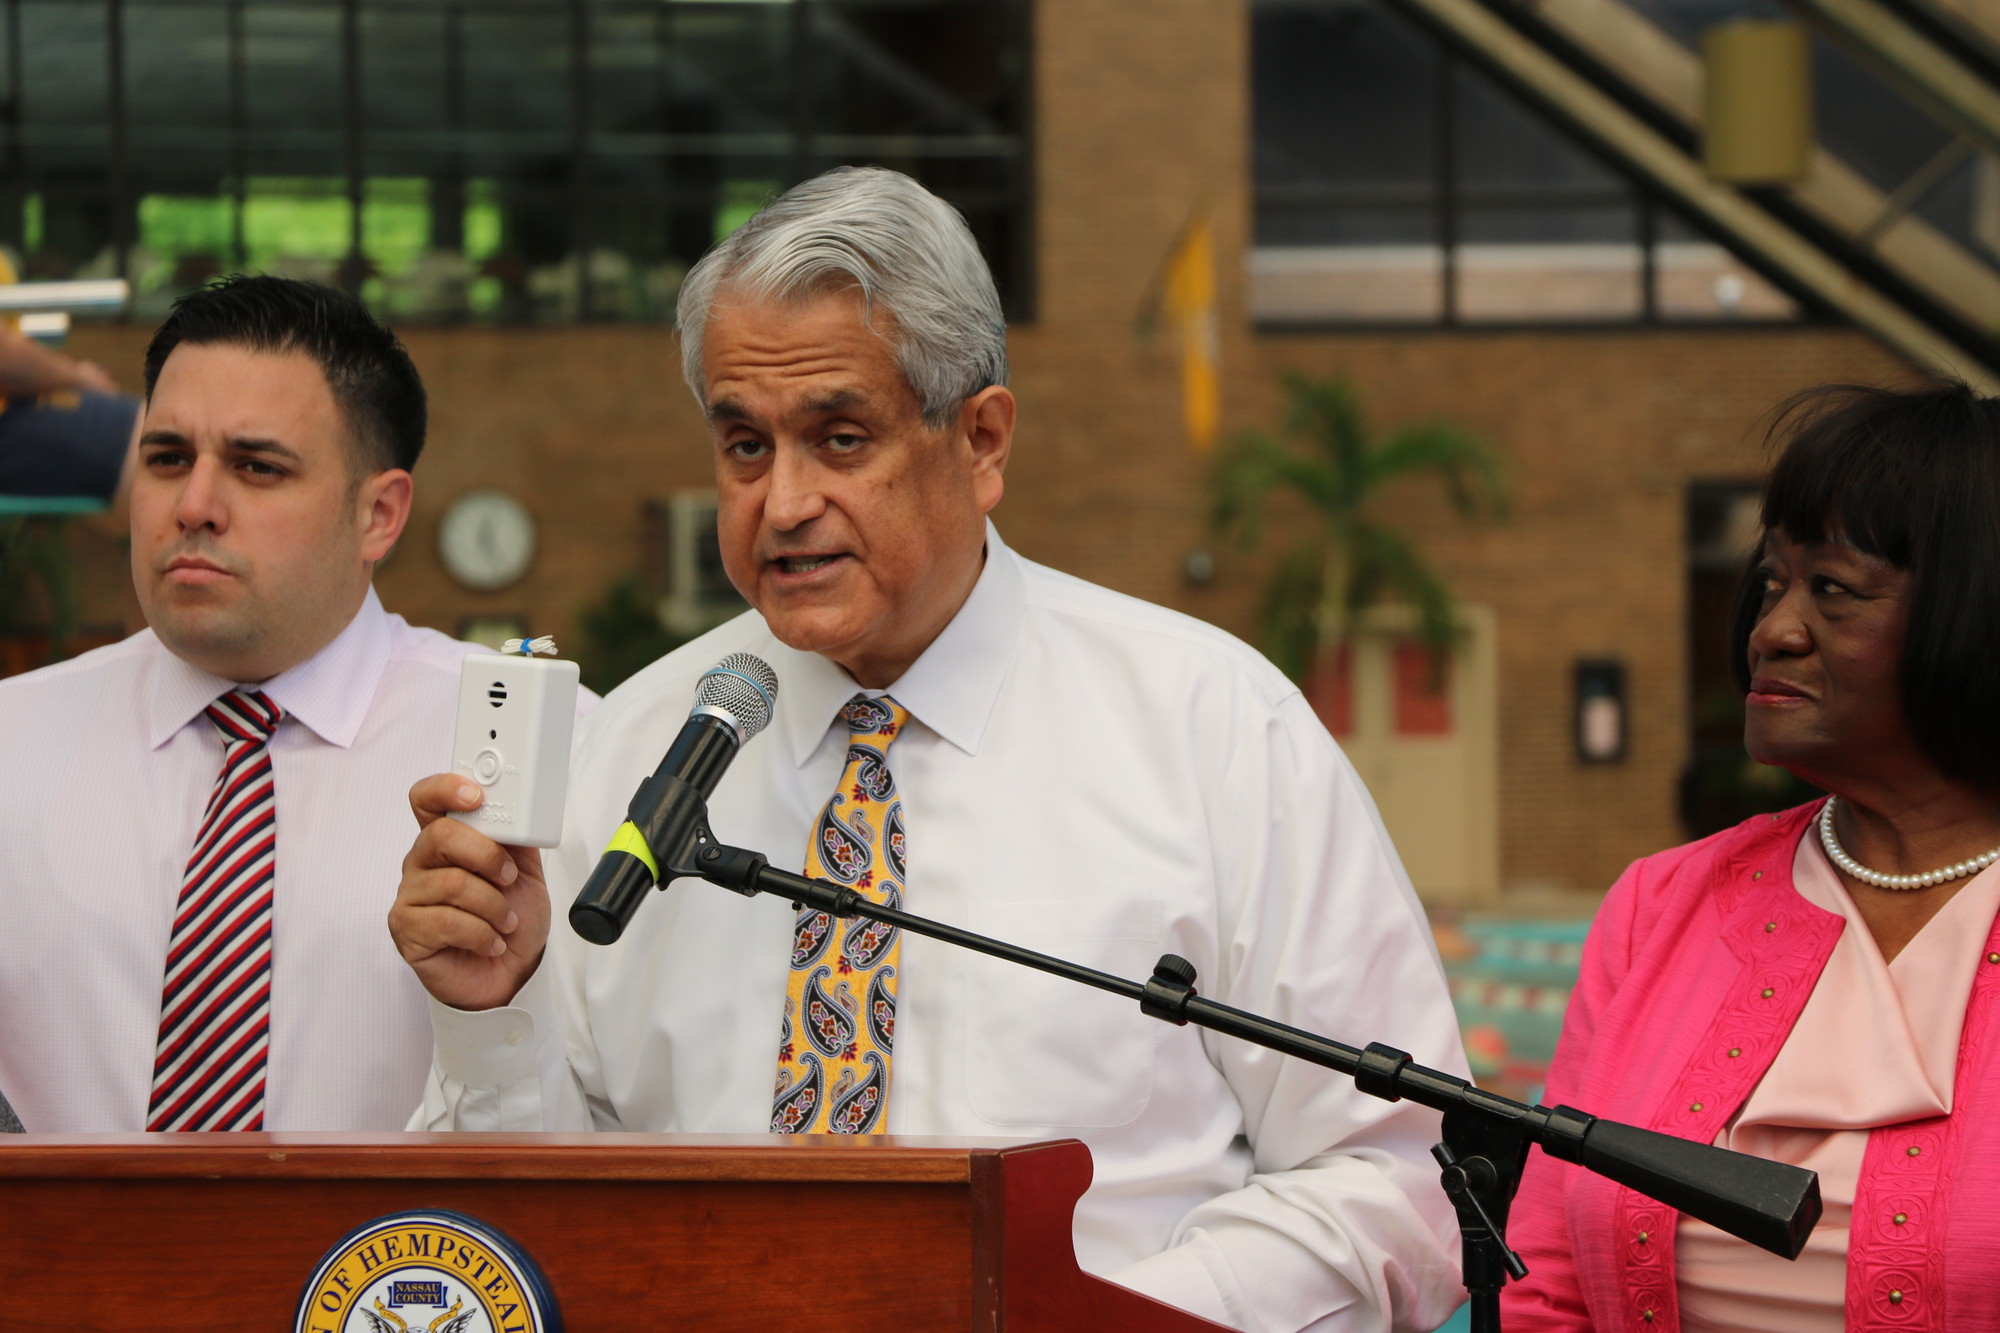 Town supervisor Anthony Santino displays remote pool alarm during a press conference last week.